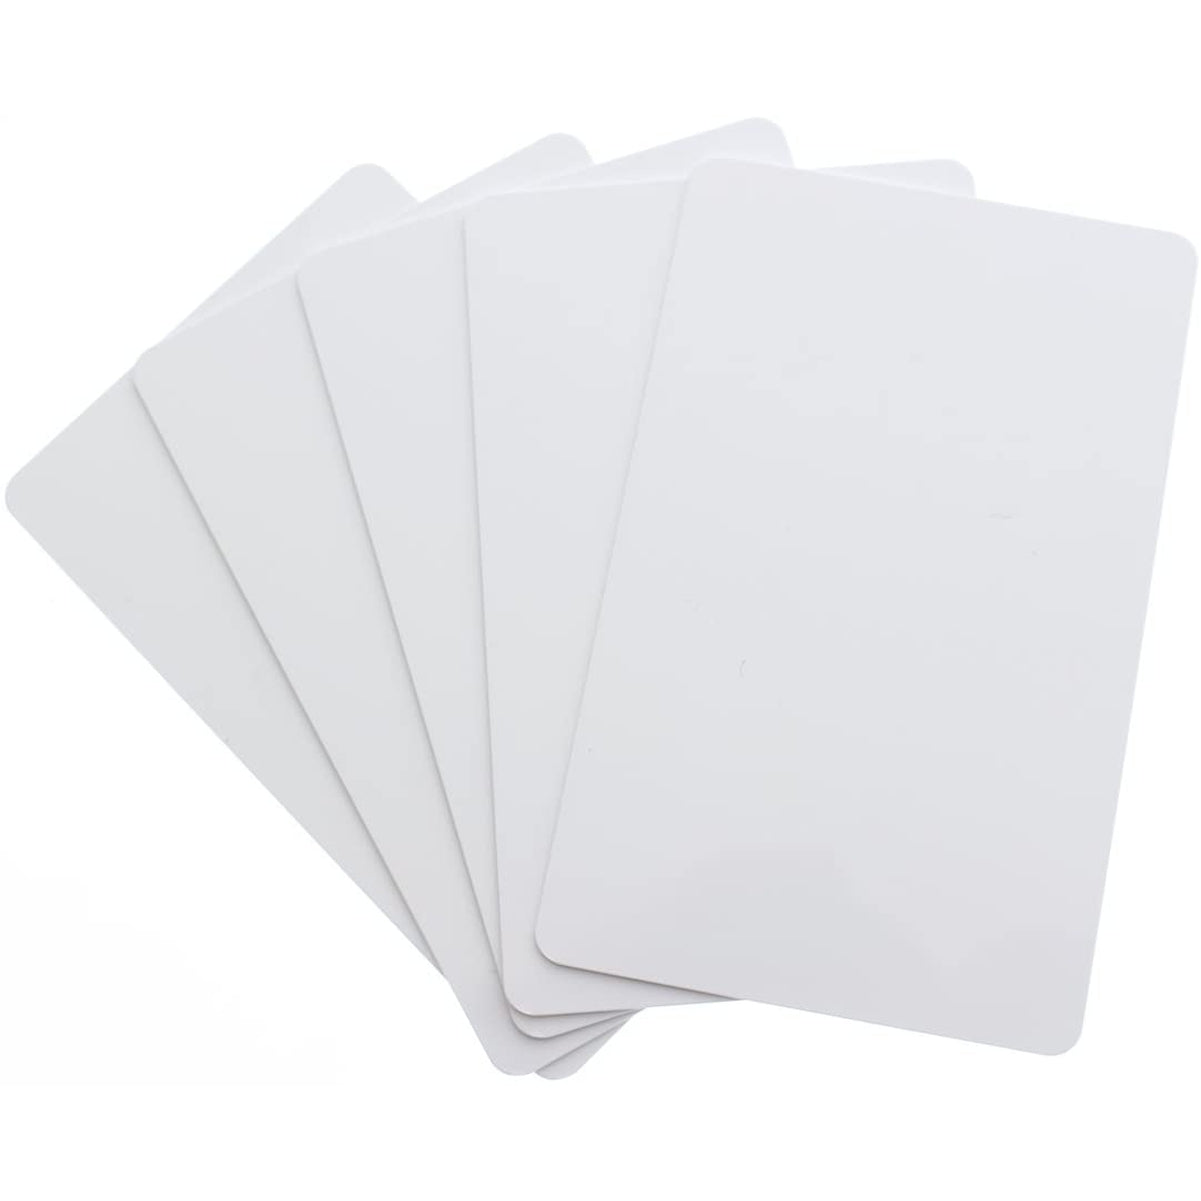 What is a White Card?